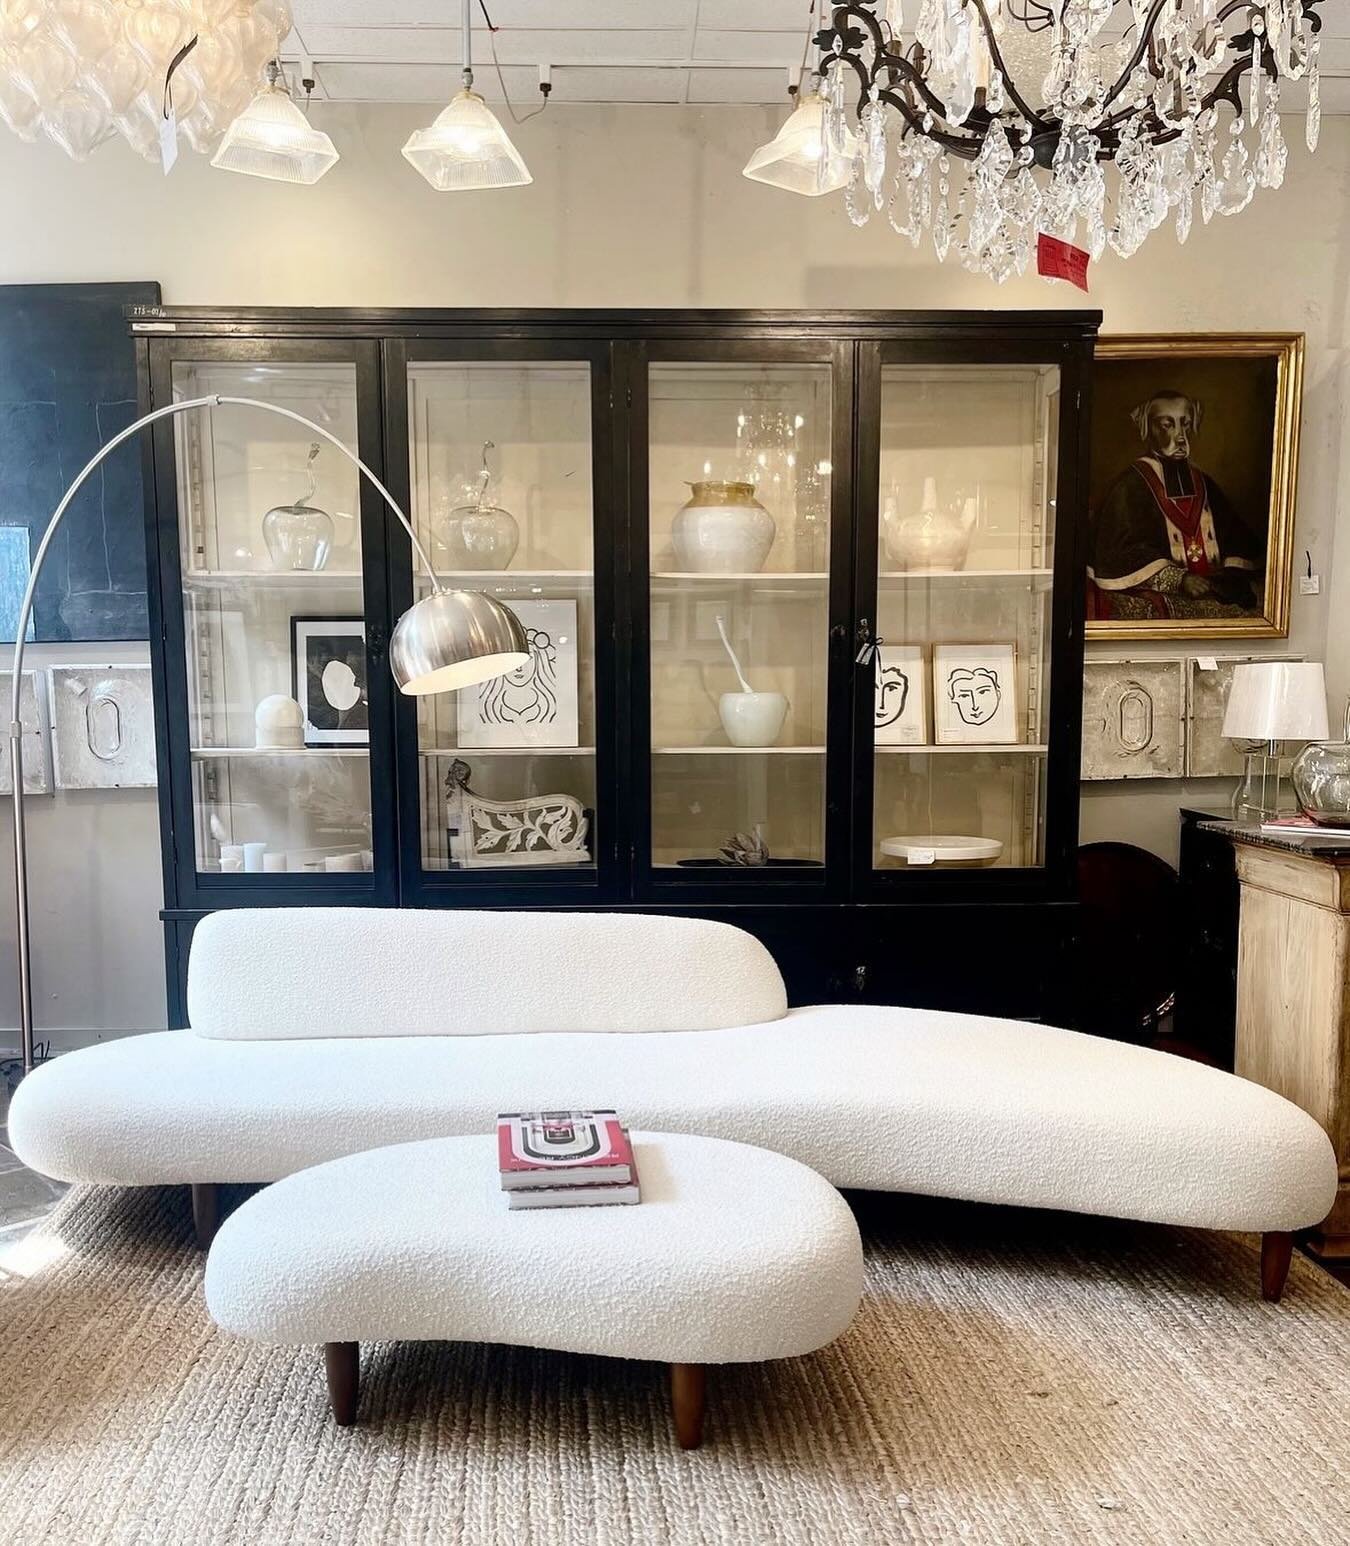 Come check out these fabulous finds @maihouston Suite #164 🛋️ Can&rsquo;t wait to see you there! ✨#kathebakerdesign
&bull;
&bull;
&bull;
#interiordesign #houstondesign #designdetails #homedesign #homesweethome #maihouston #houstoninteriordesigner